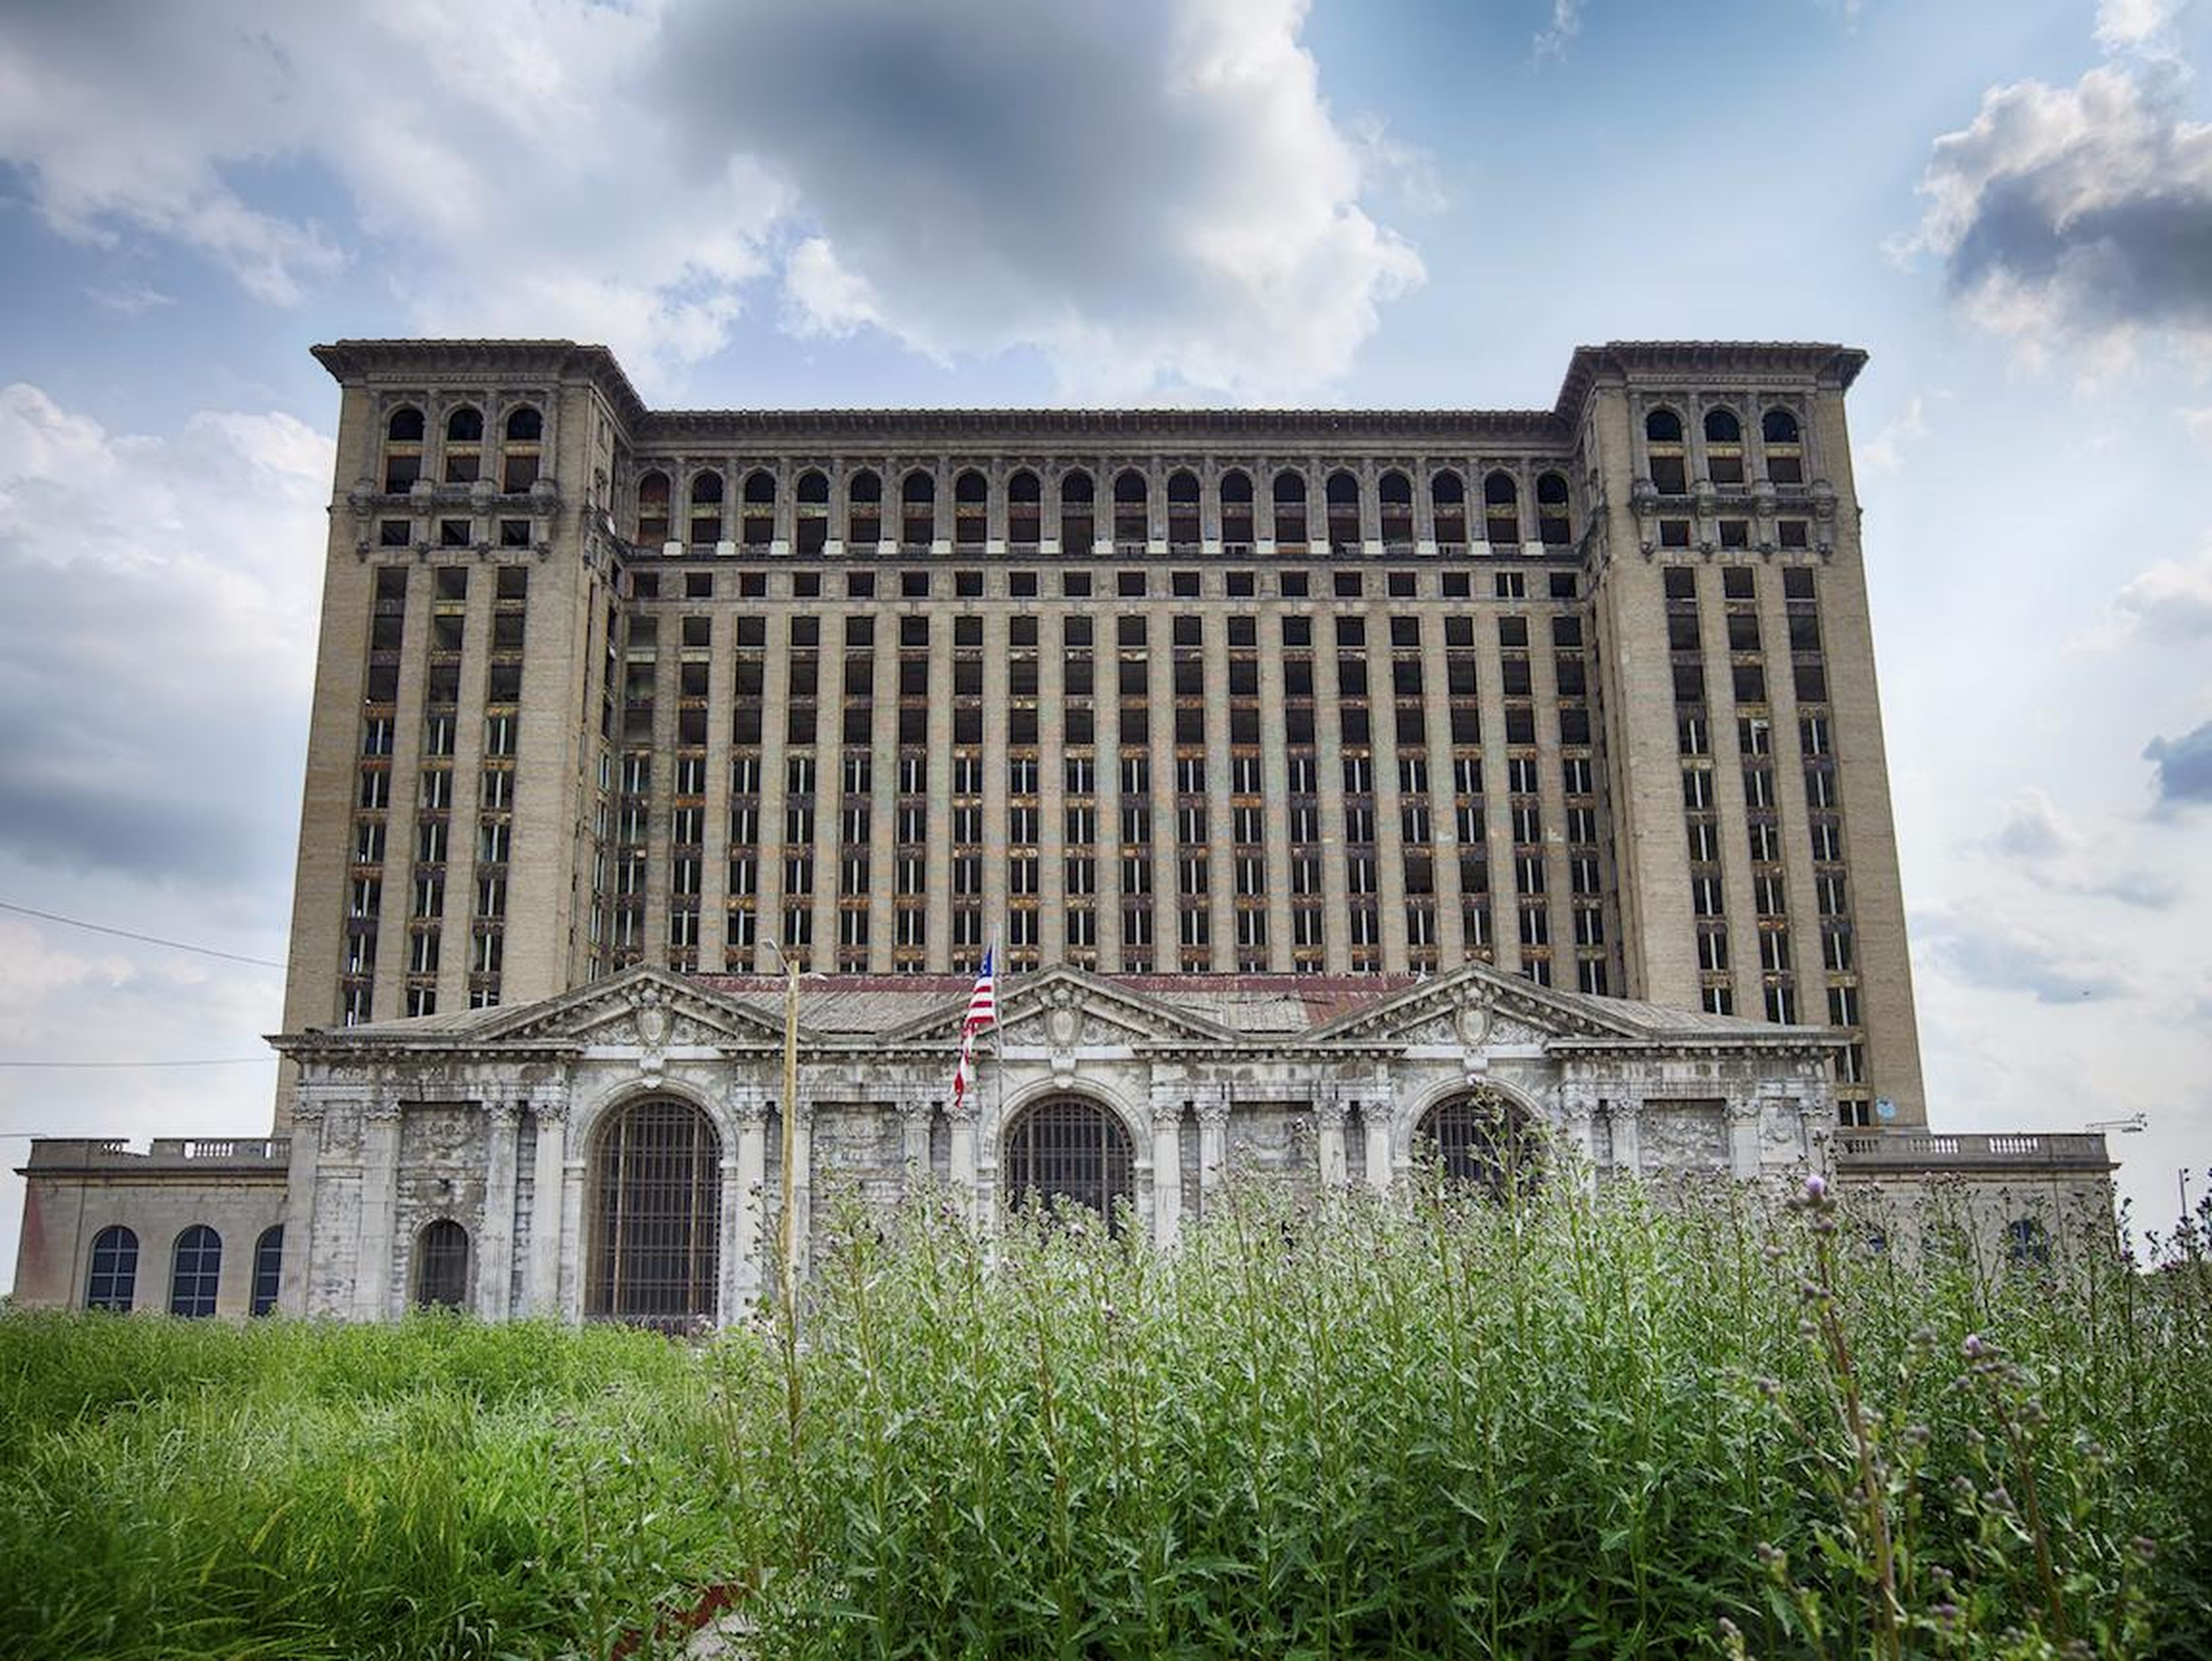 Michigan Central Station in Detroit used to be the tallest train station in the world.